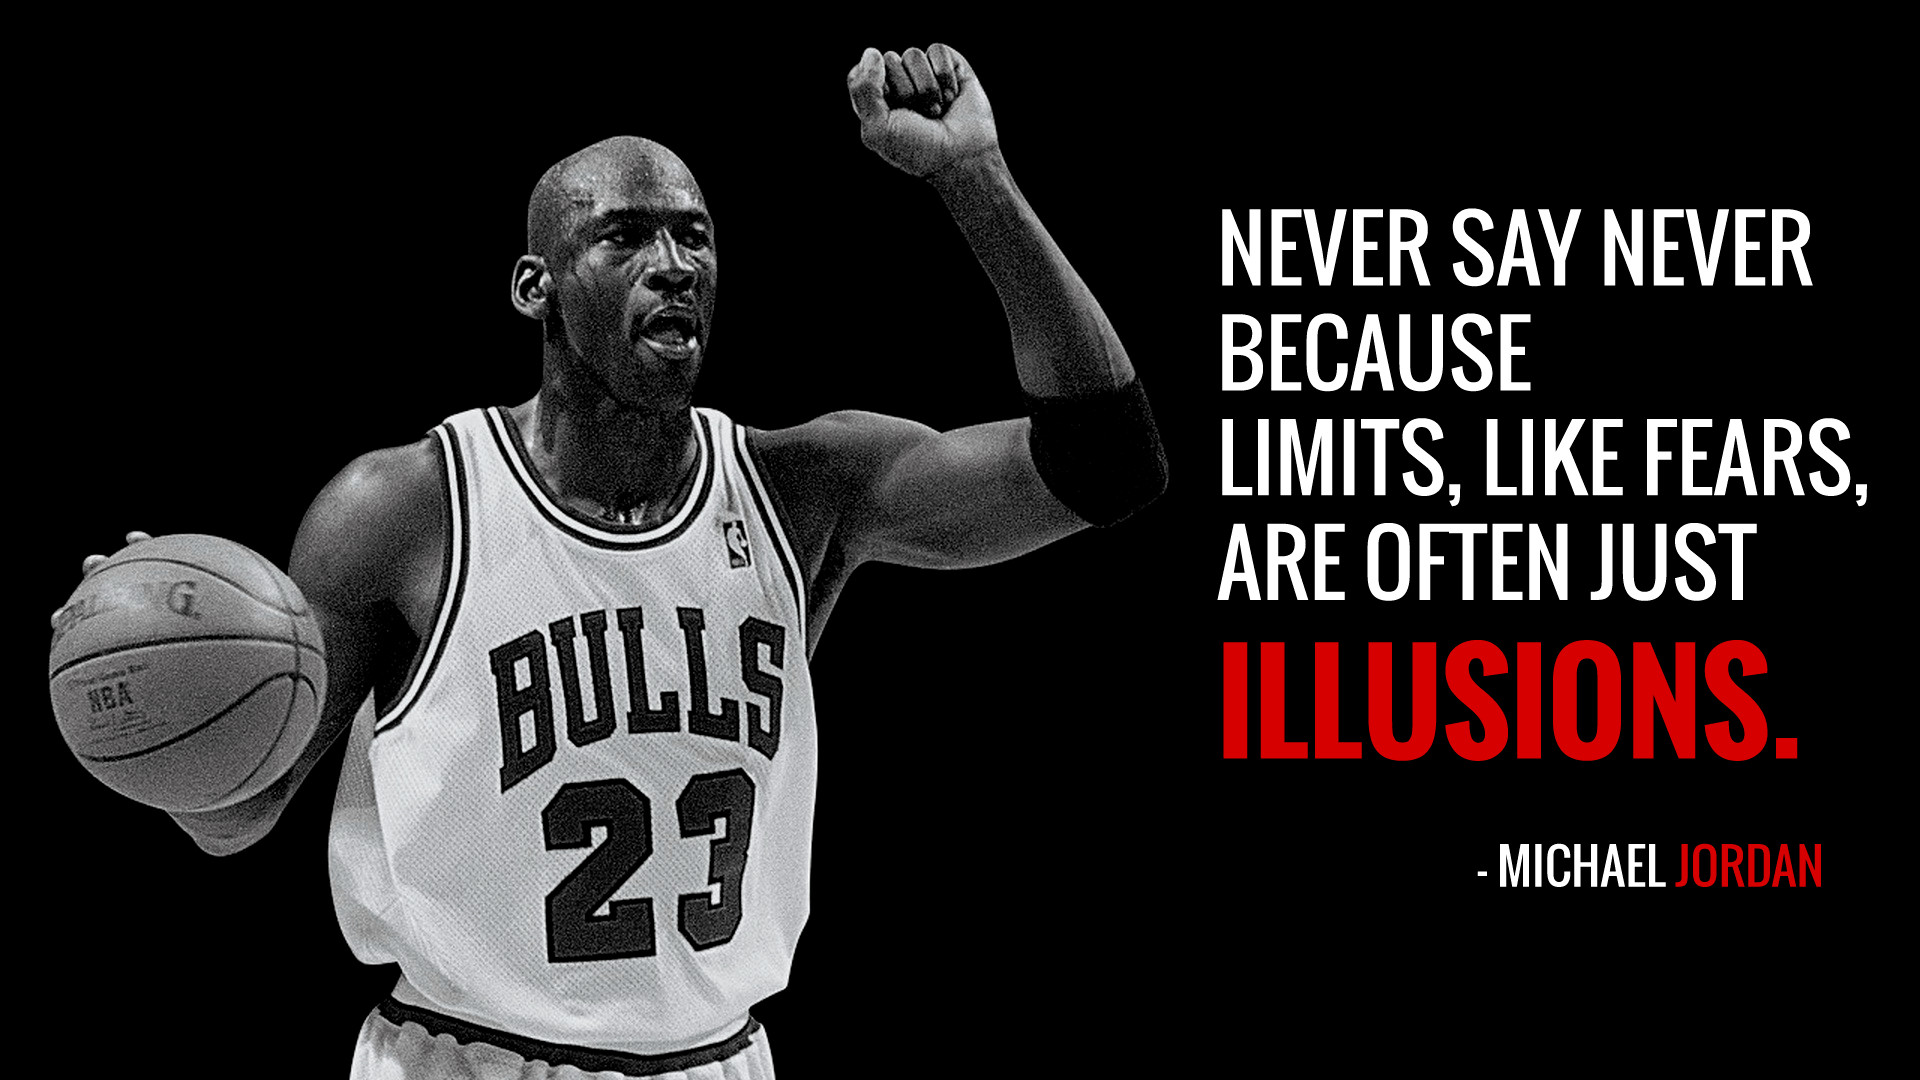 Motivational Sport Quotes
 25 All Time Best Inspirational Sports Quotes To Get You Going